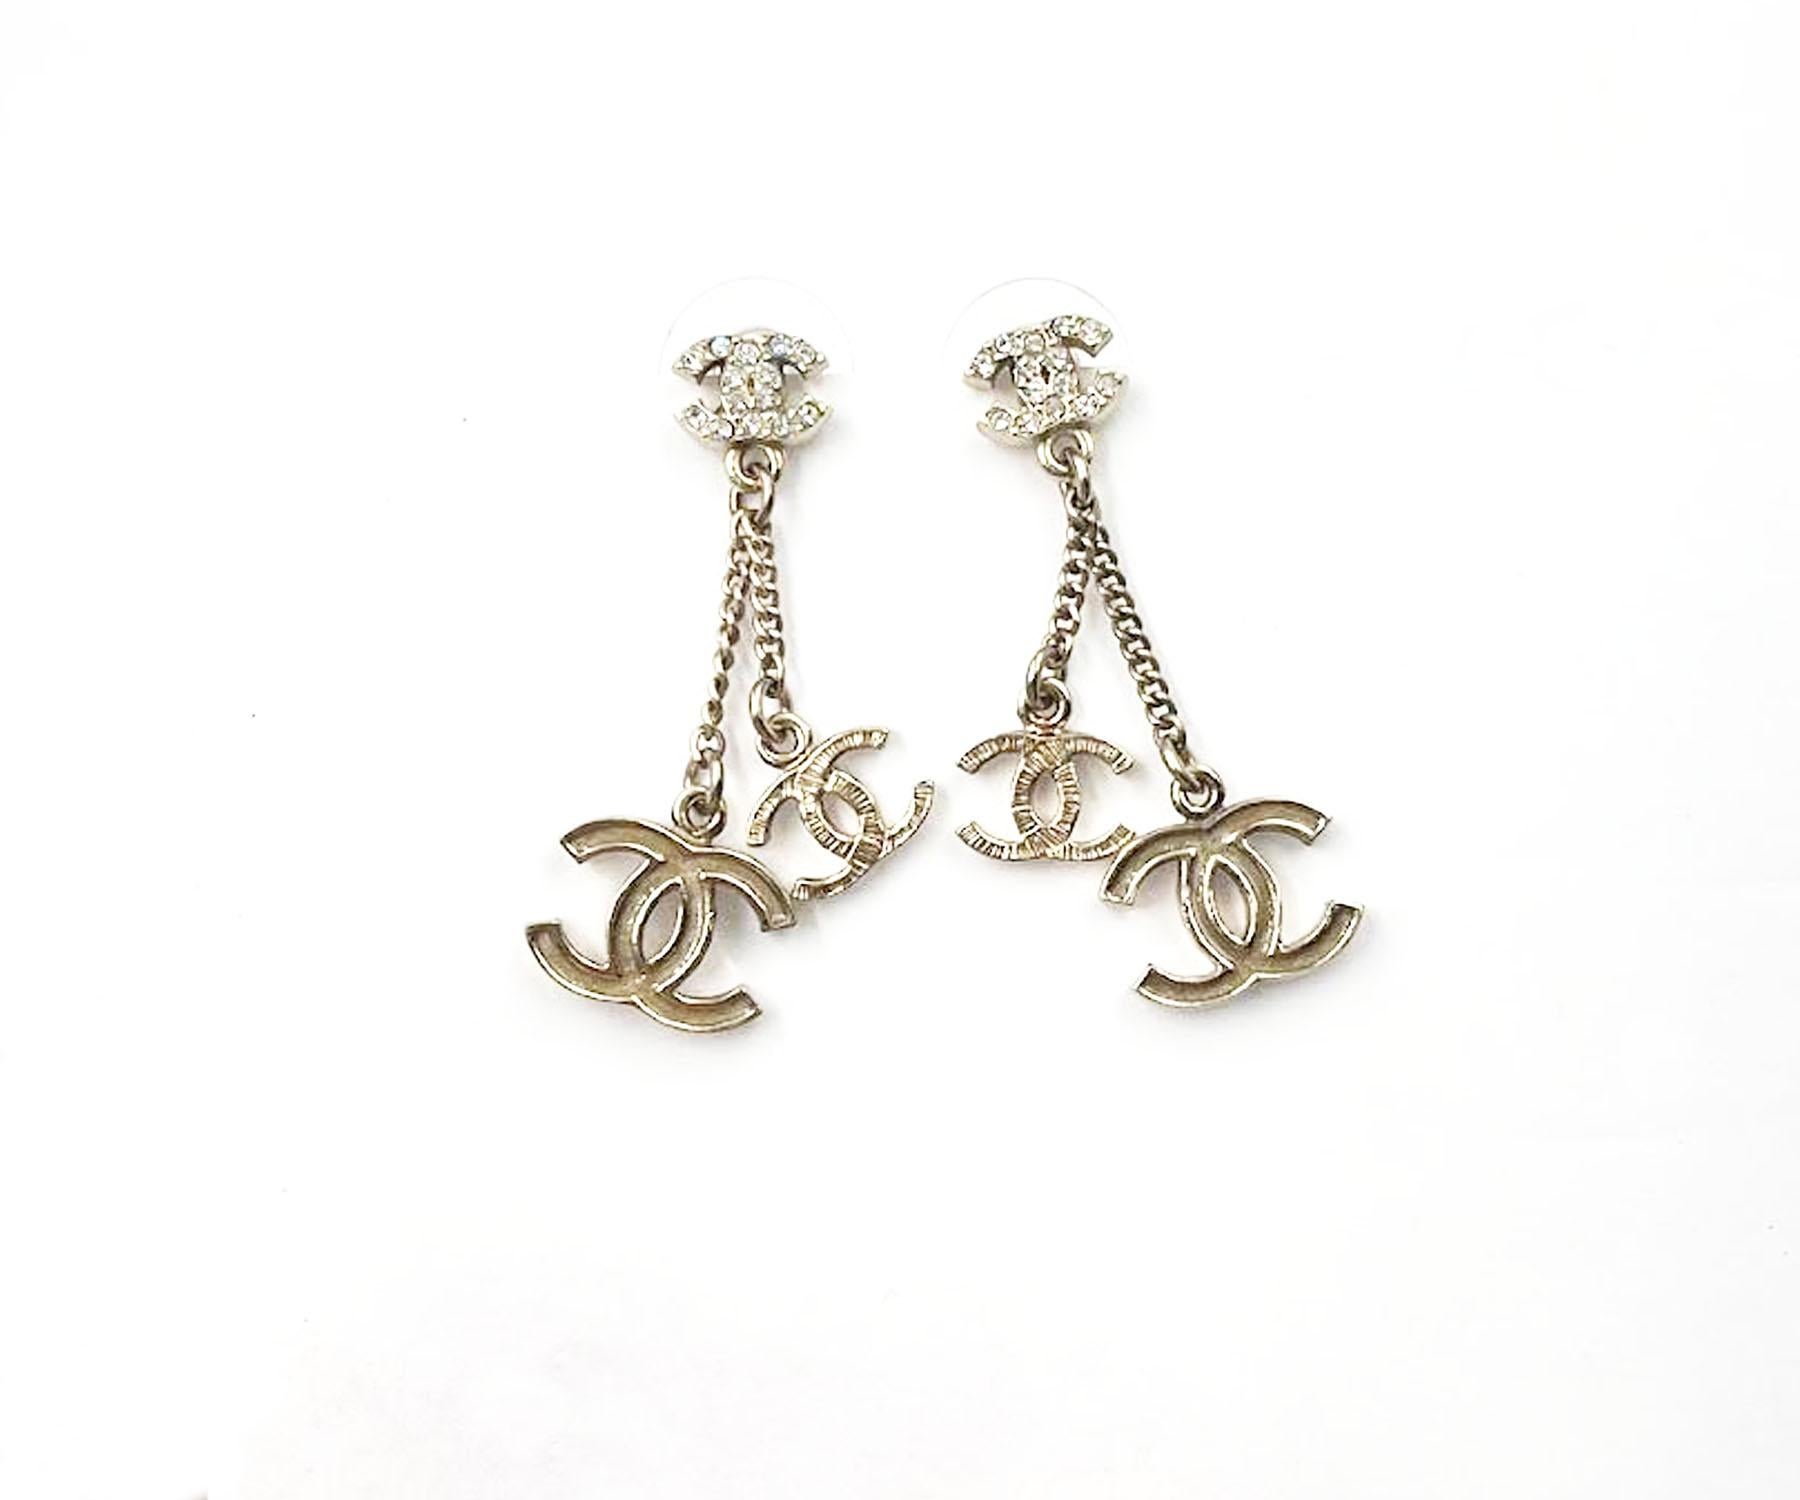 Chanel Gold CC Crystal Double CC Dangle Piercing Earrings

* Marked 09
* Made in France
*Comes with the original box

-It is approximately 0.5